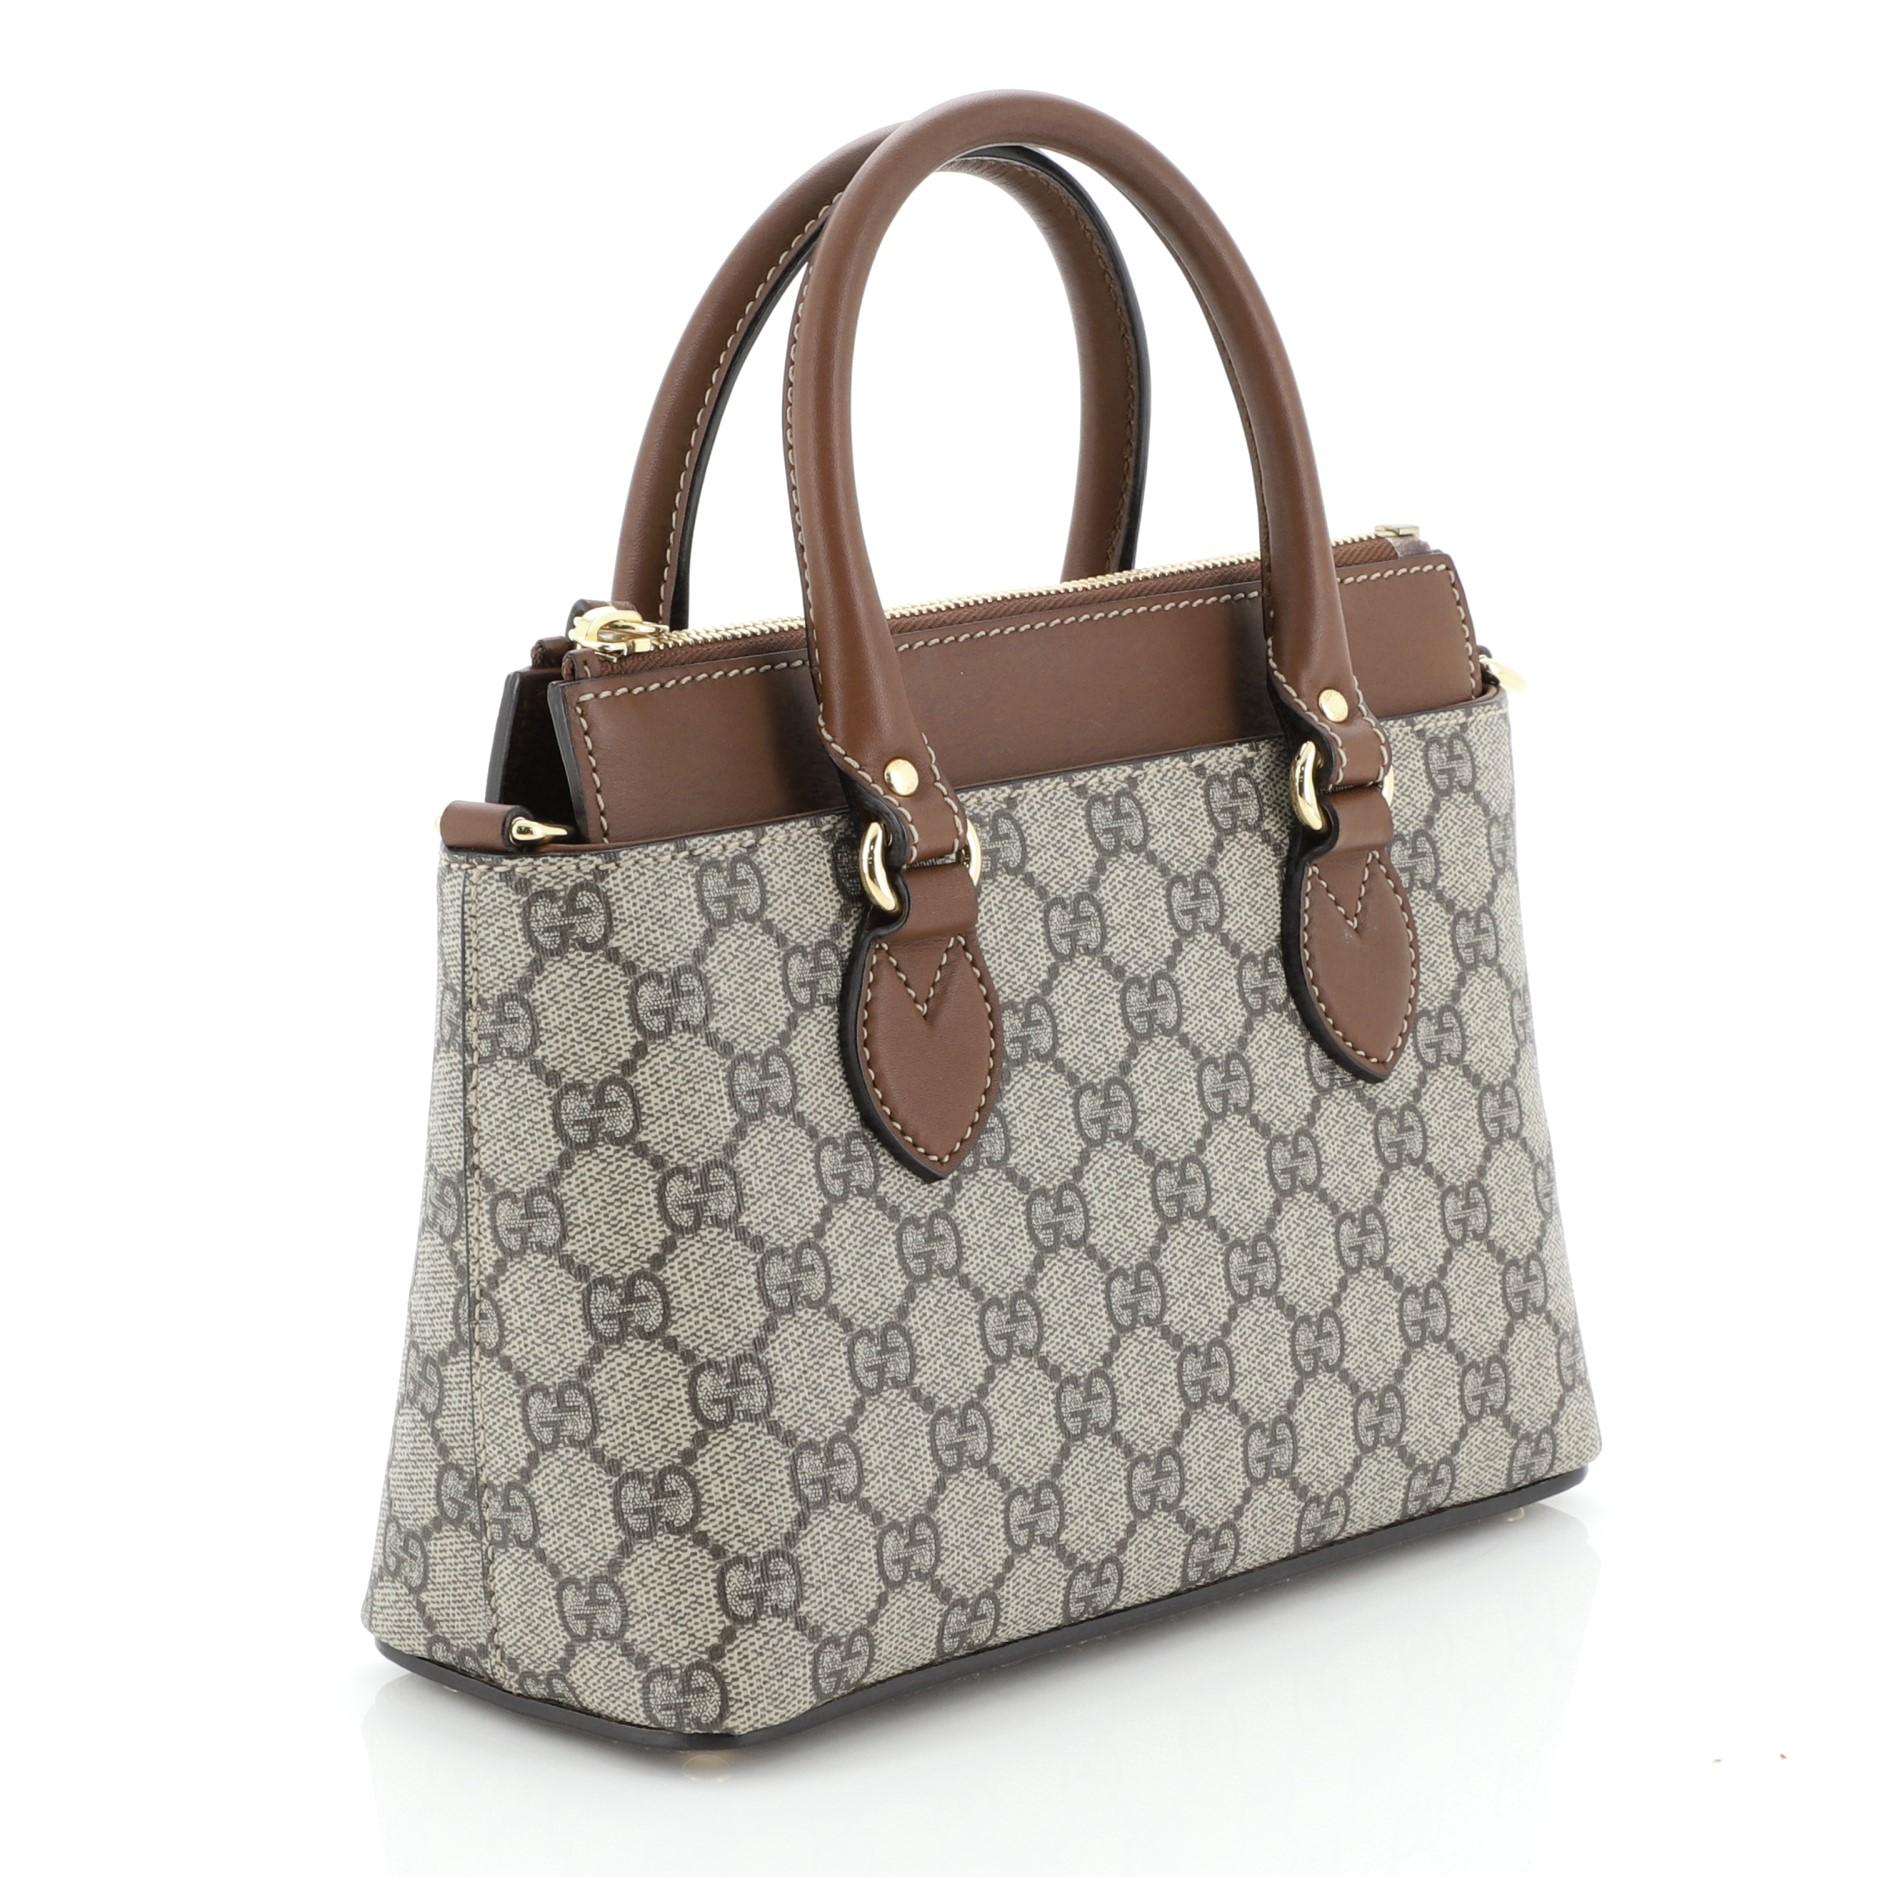 This Gucci Linea A Convertible Tote GG Coated Canvas Mini, crafted in brown GG coated canvas, features dual rolled leather handles, protective base studs, and gold-tone hardware. Its zip closure opens to a brown microfiber interior with slip